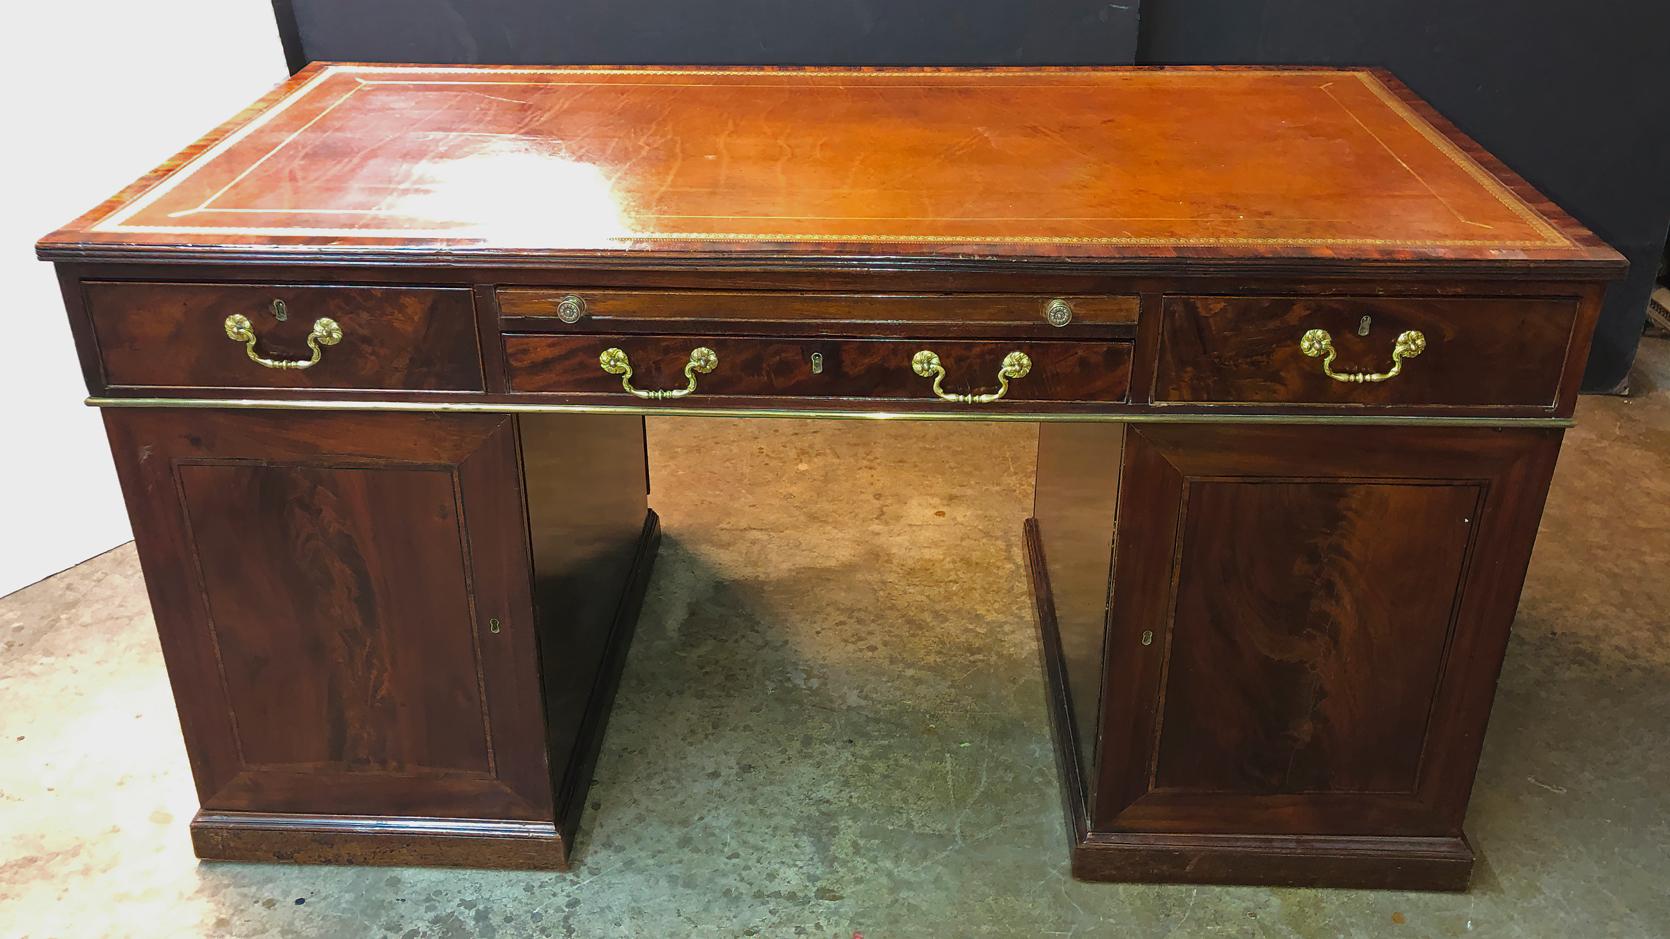 A rare and unusual George III mahogany leather top Partner's desk with two slide-out tooled leather architectural writing slides and raised on cabinet pedestal bases.